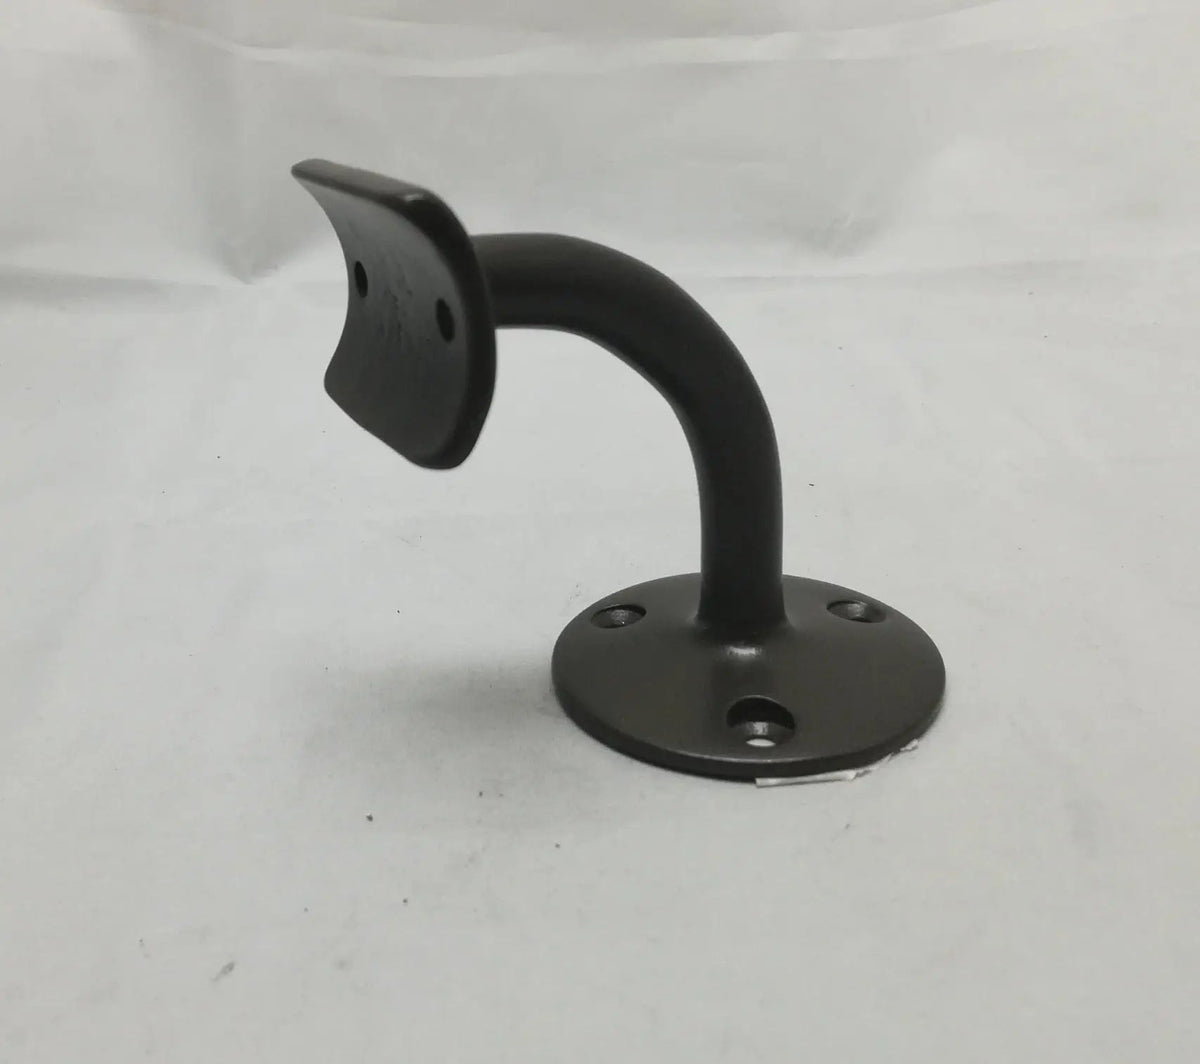 3-Screw Hand Rail Bracket for 2" Tubing Brackets, Components for 2" Od Tubing OilRubbedBronzeFinish-PleaseCall Trade Diversified